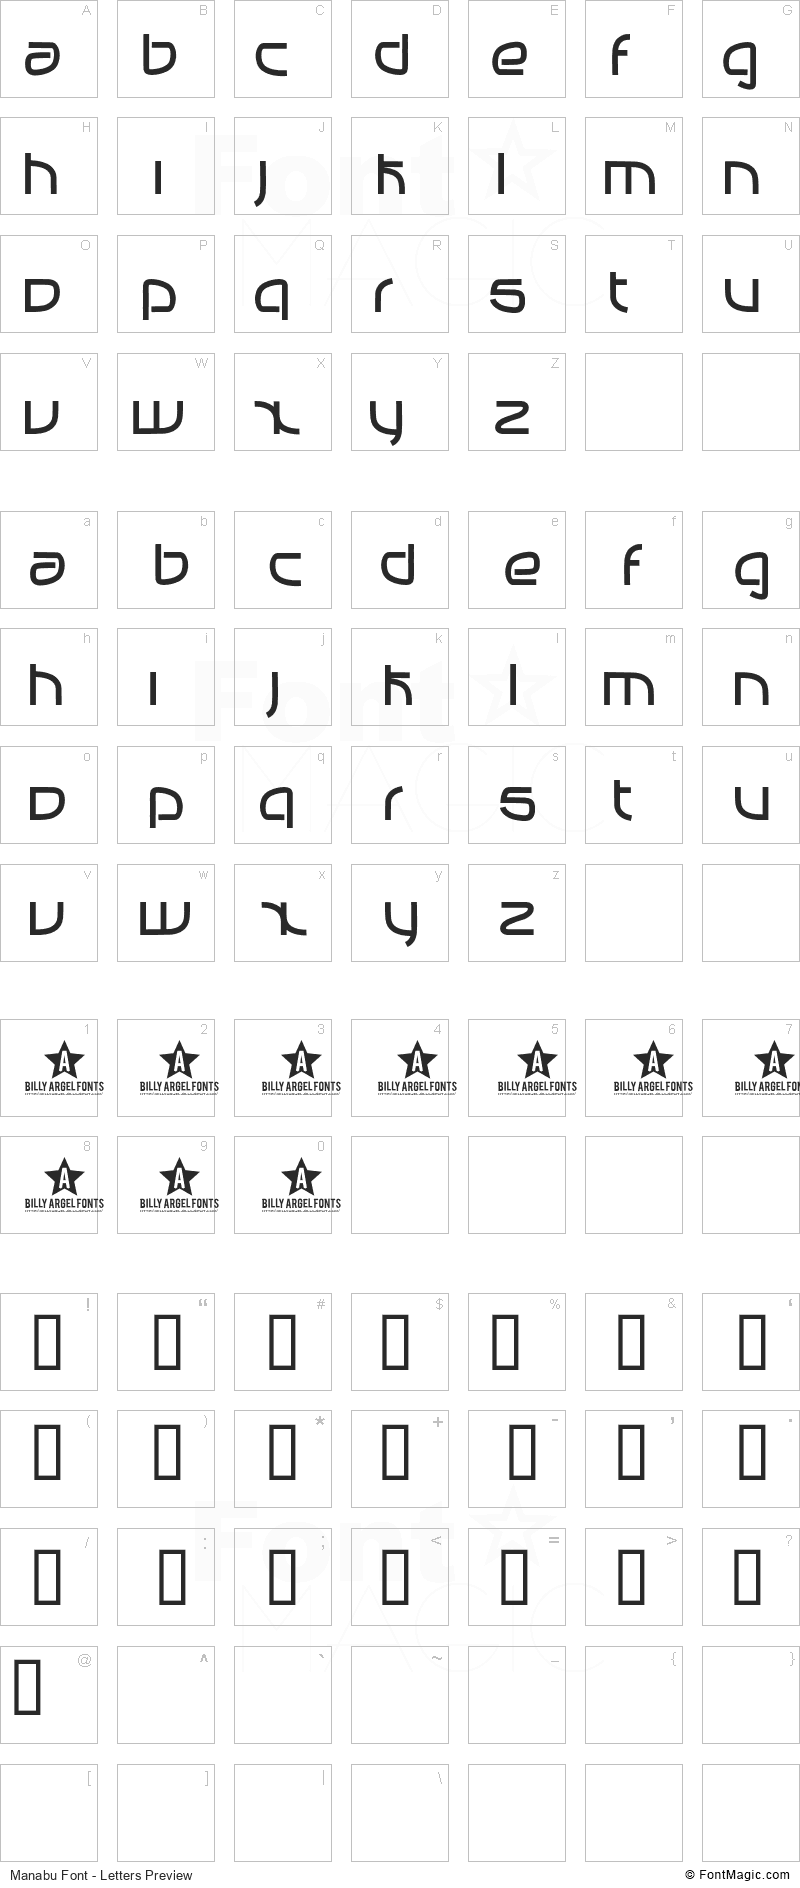 Manabu Font - All Latters Preview Chart